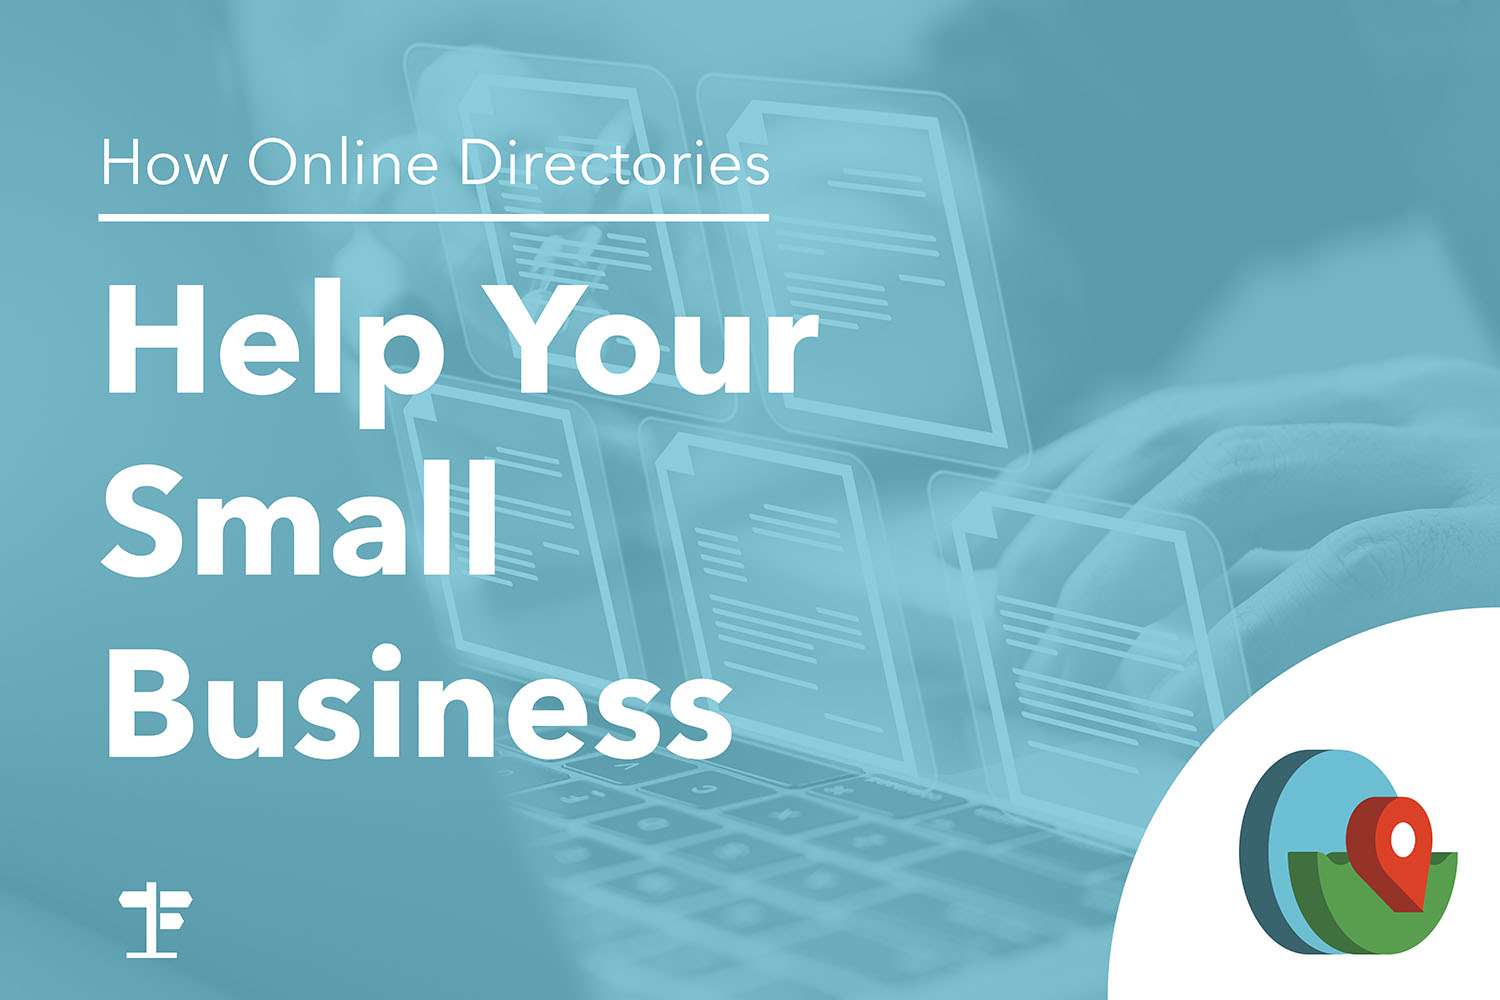 How online directories help your small business